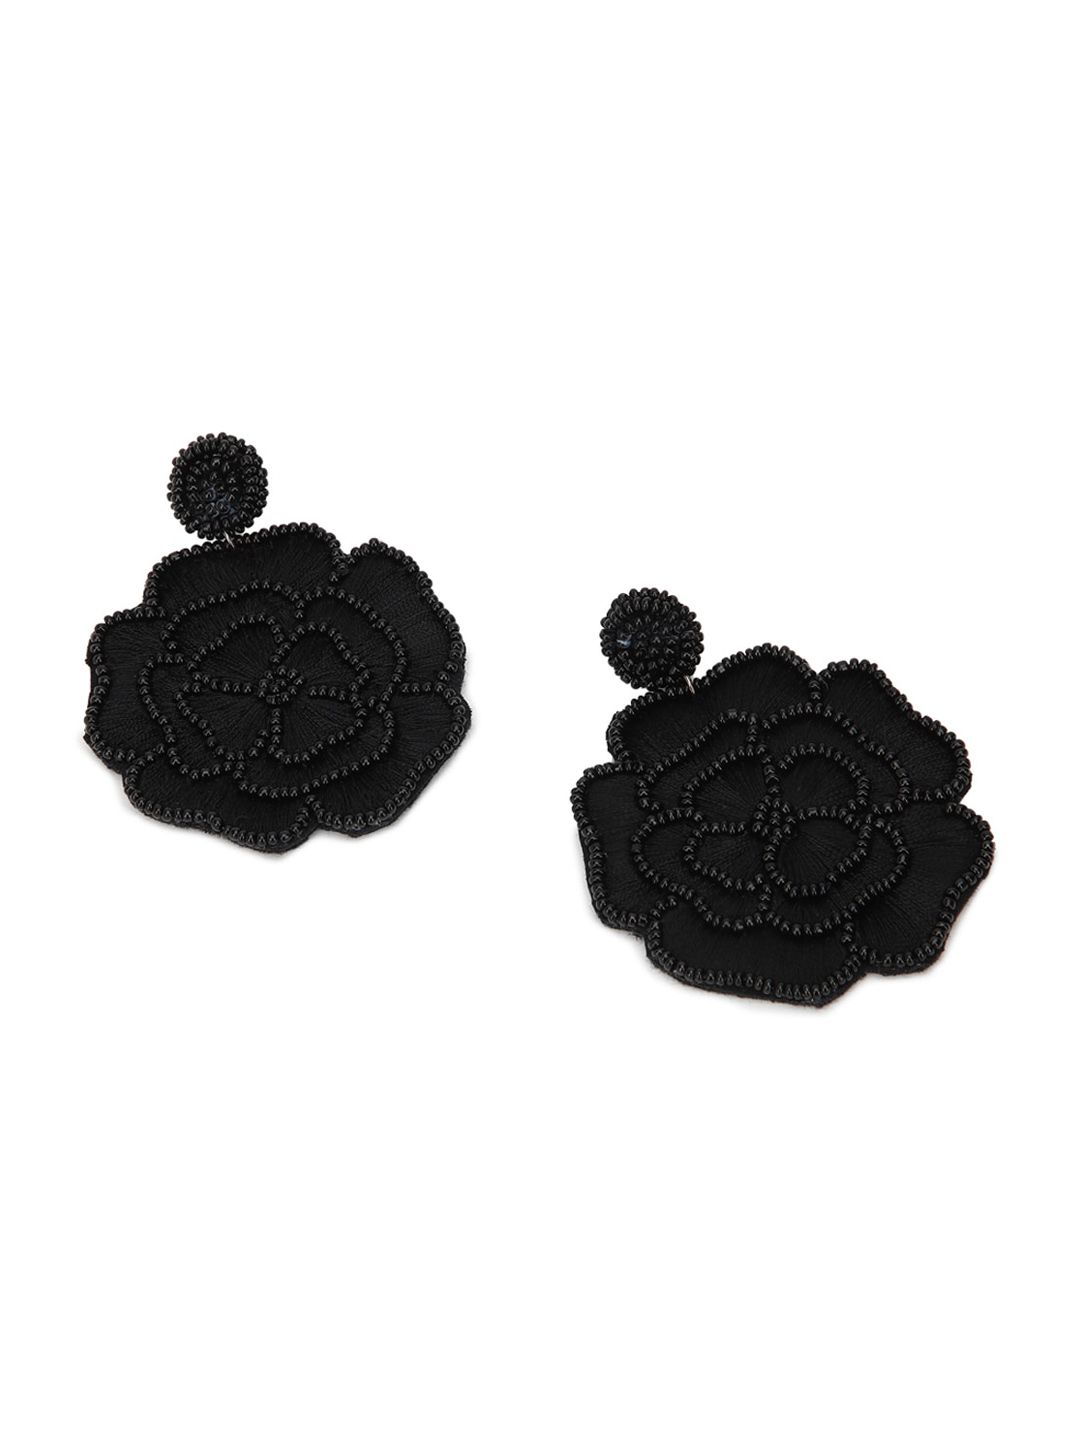 FOREVER 21 Black Floral Contemporary Drop Earrings Price in India